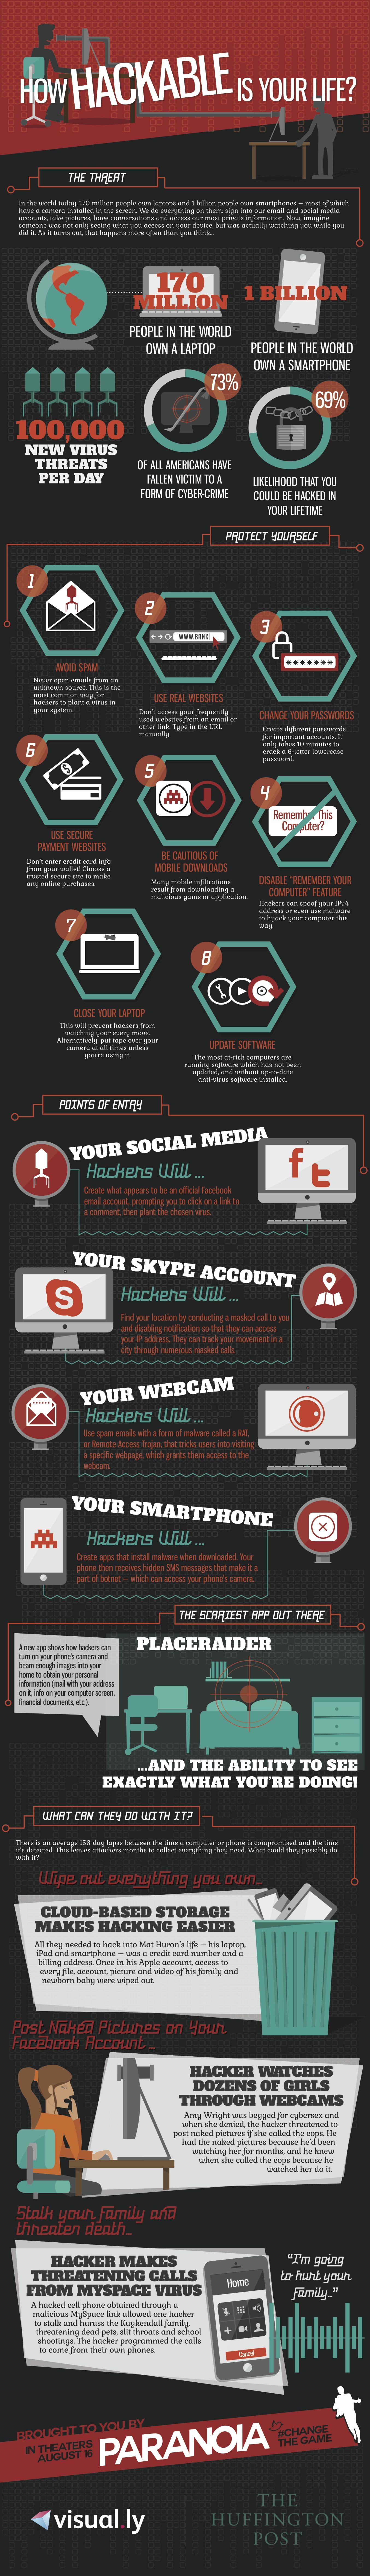 how-hackable-are-you-infographic